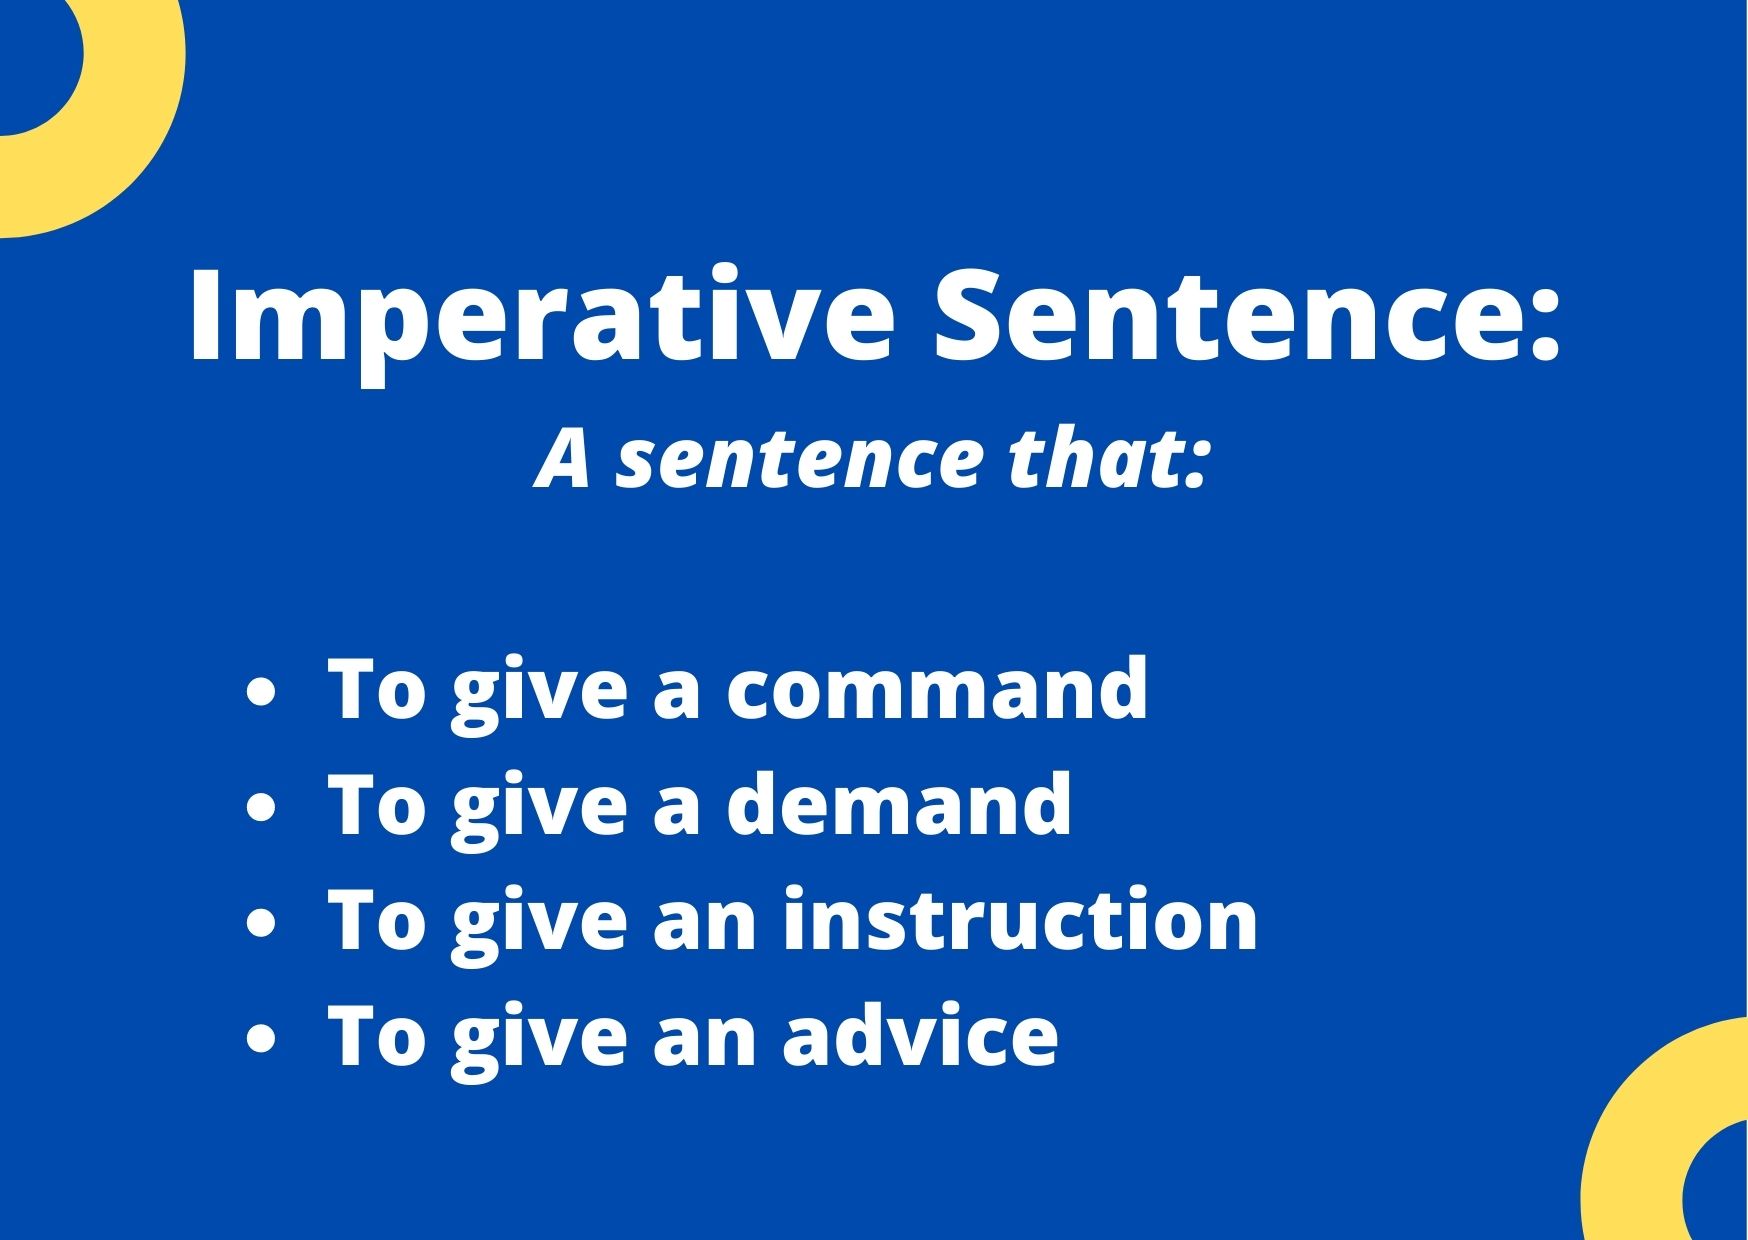 A graphic that gives the definition an imperative sentence: a sentence that gives command, instruction, advice or demand